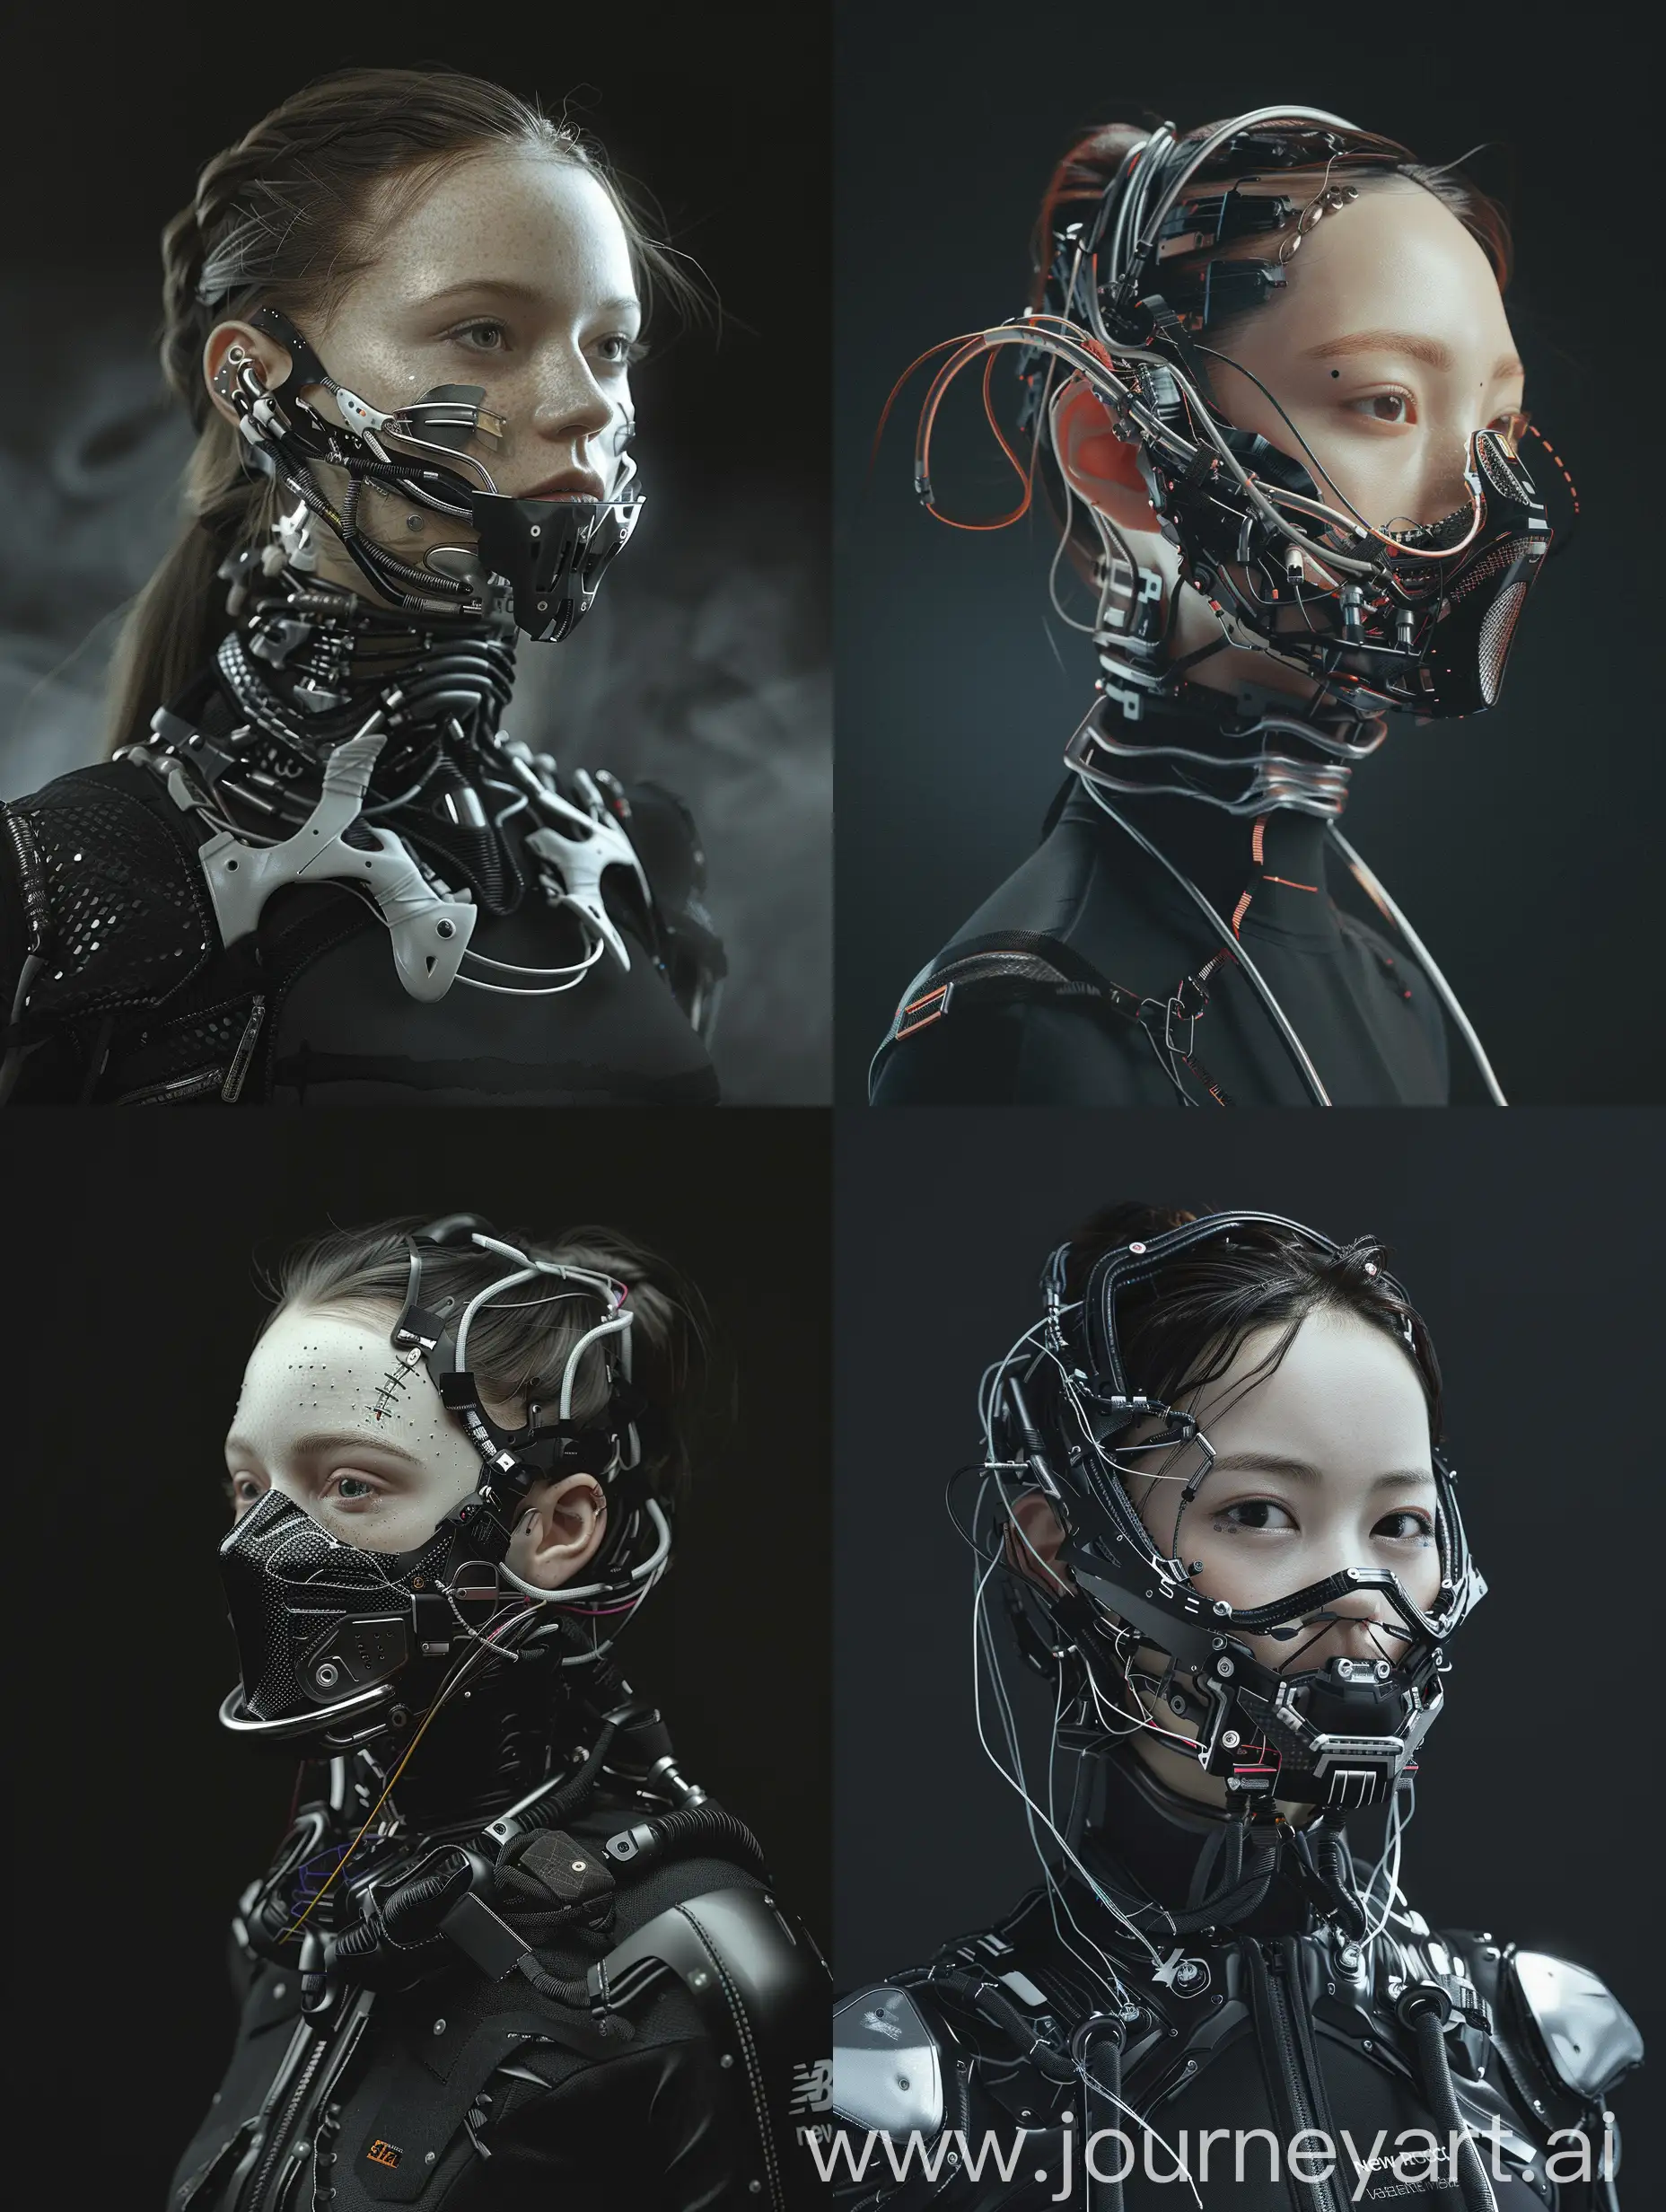 Futuristic-Cyberpunk-Woman-with-Cybernetic-Mask-in-Dynamic-Action